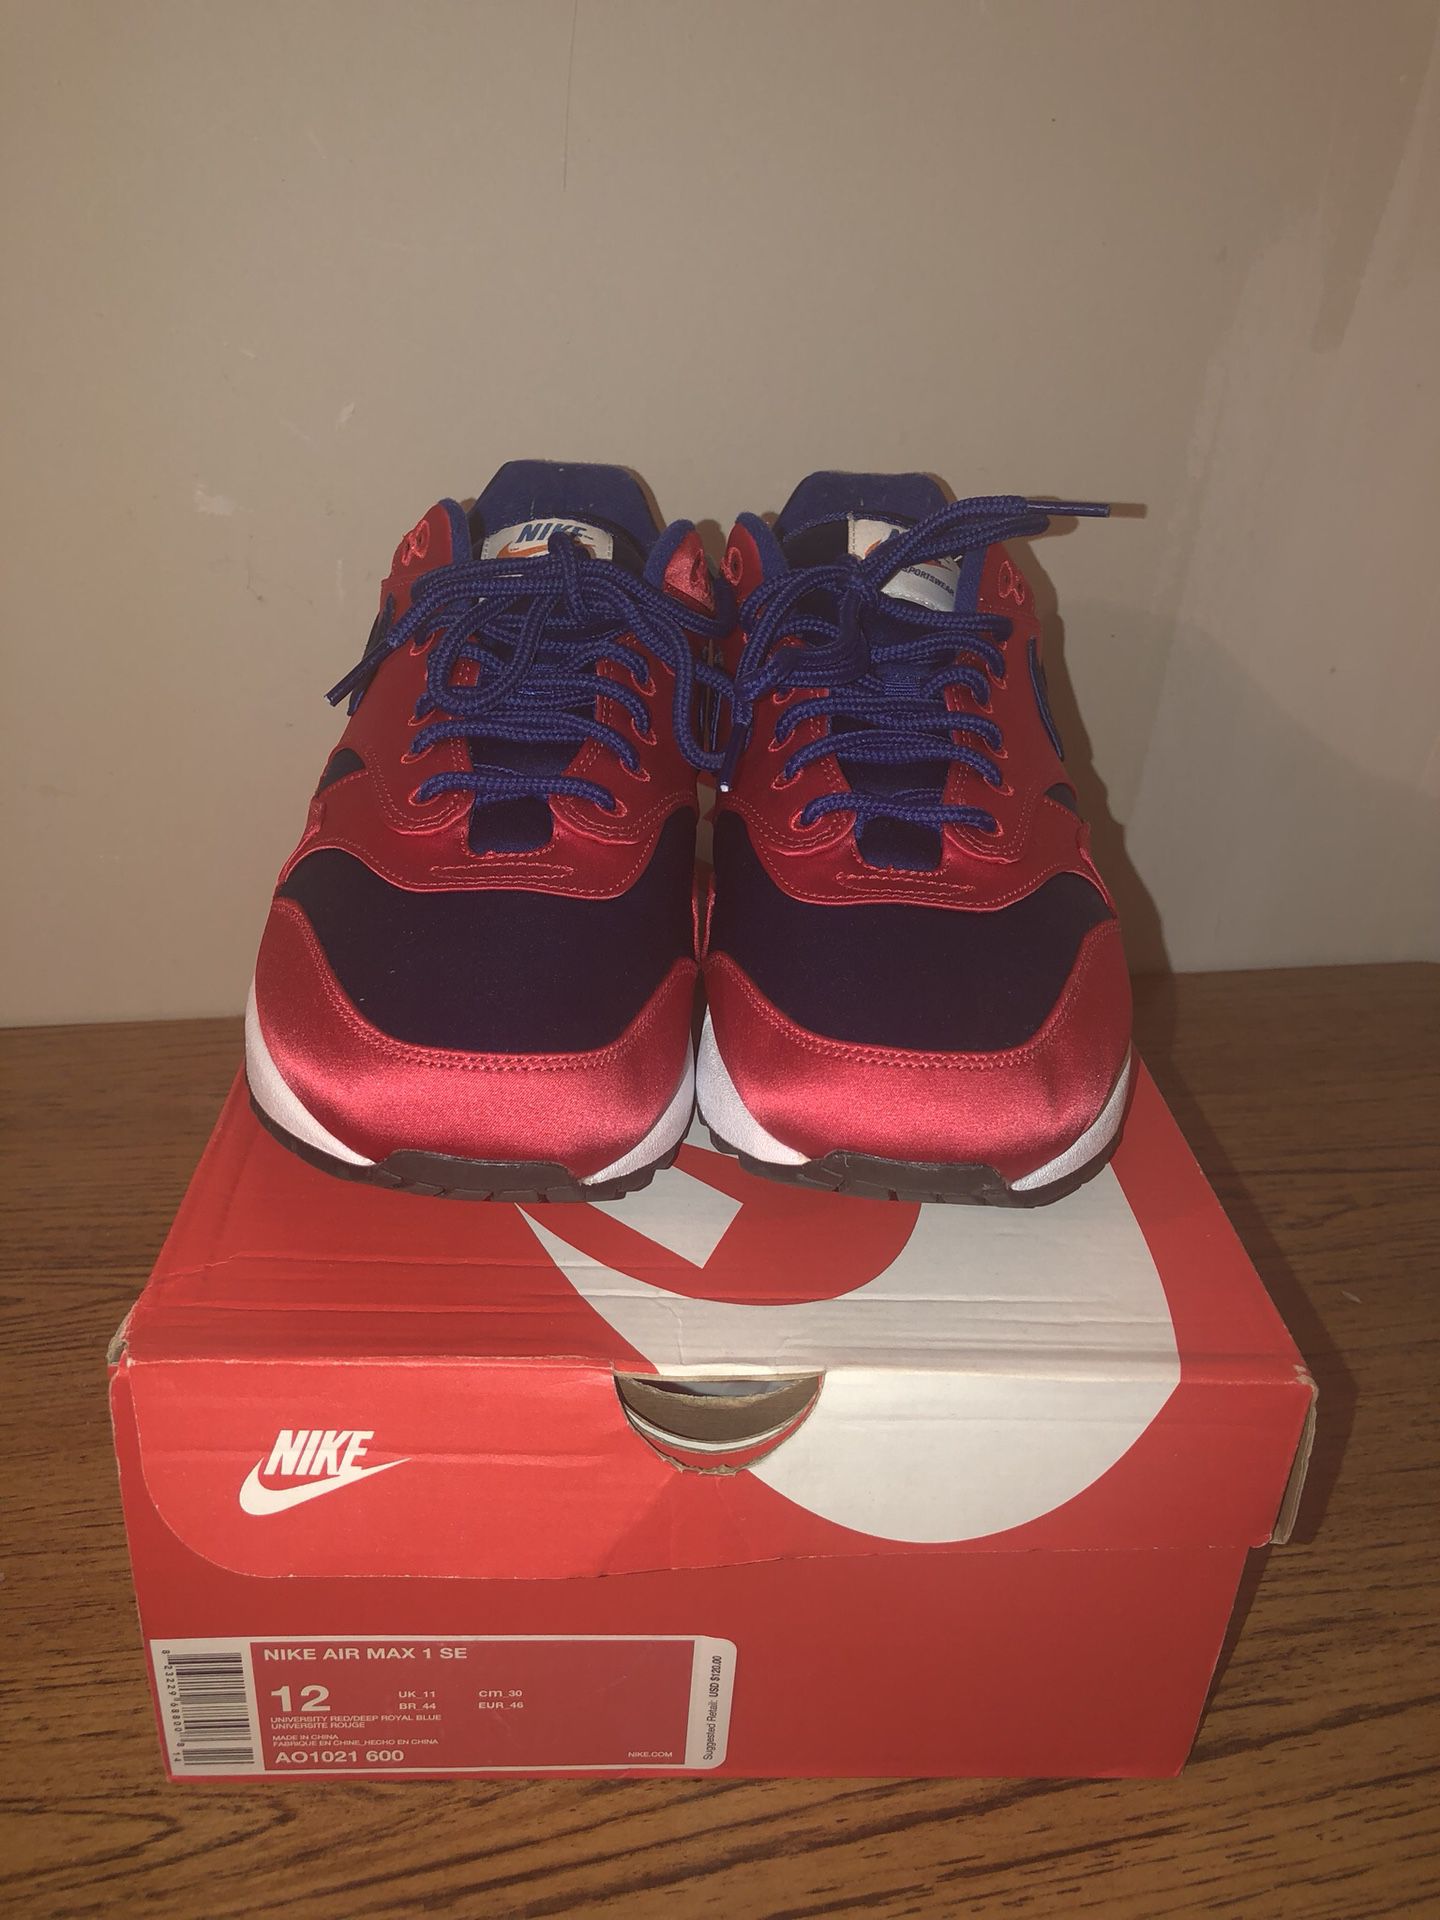 Red/Blue Nike Satin size 12 never worn